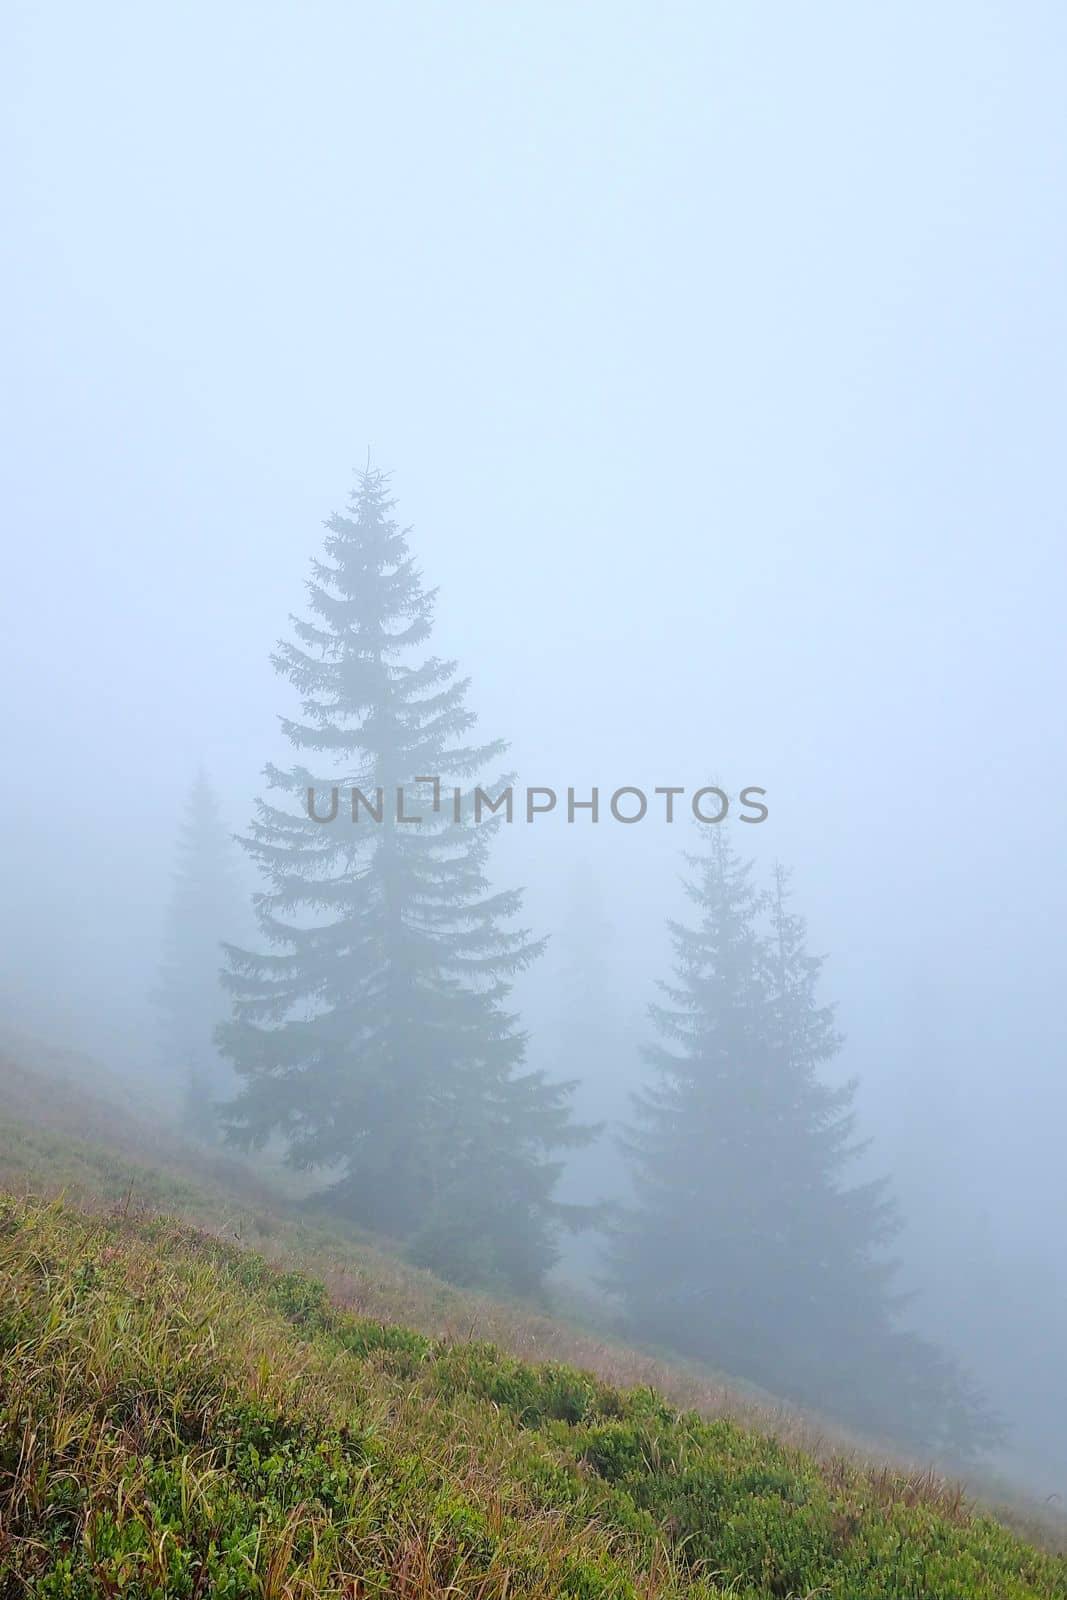 Silhouettes of trees on a foggy morning in the mountains or forest